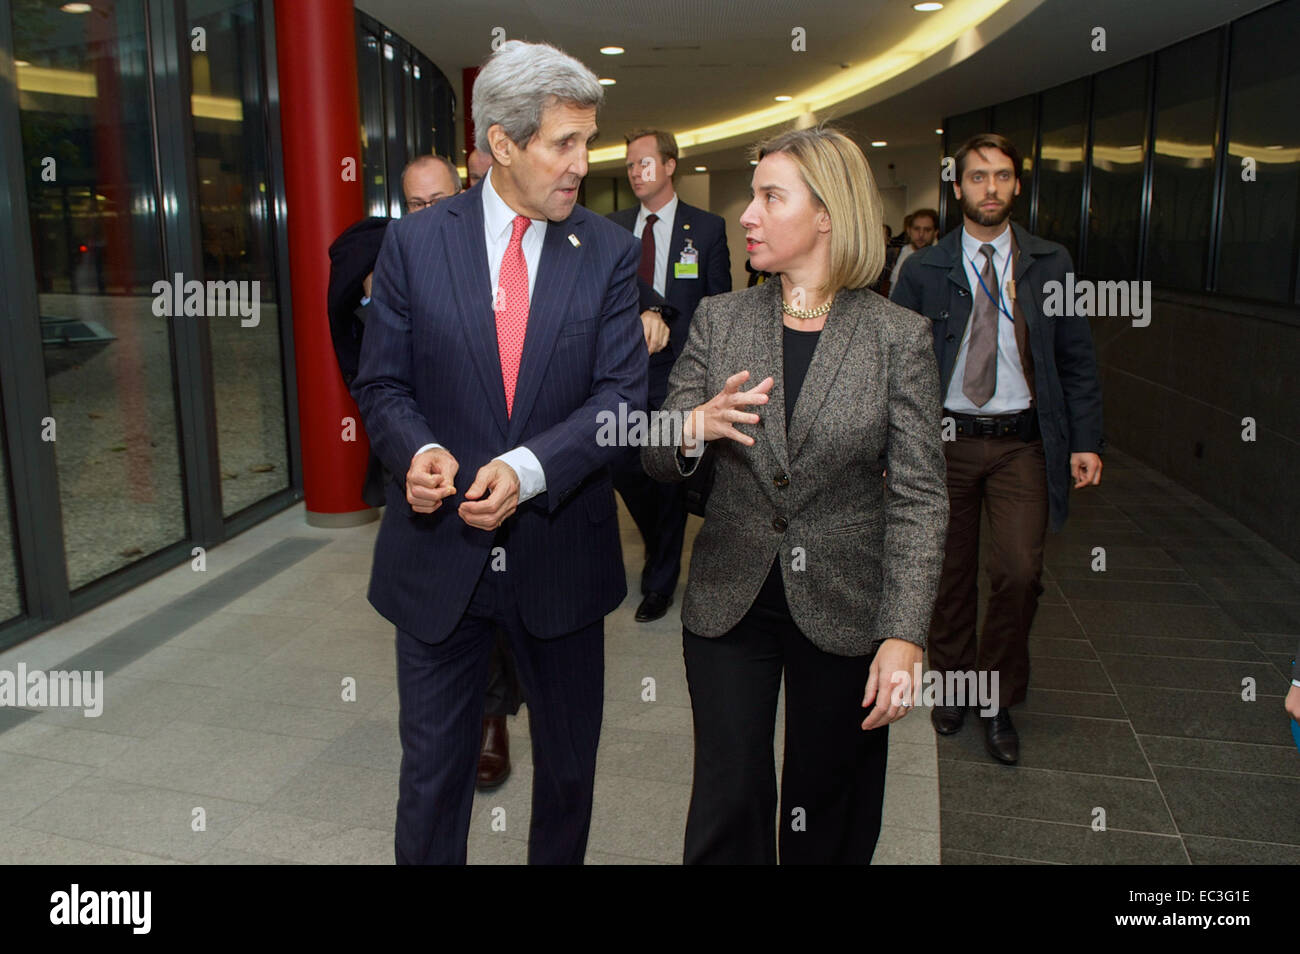 U.S. Secretary of State John Kerry walks with European Union High Representative for Foreign Affairs Federica Mogherini before a wide-ranging meeting on December 3, 2014, at the headquarters of the E.U. External Action Service in Brussels, Belgium. Stock Photo